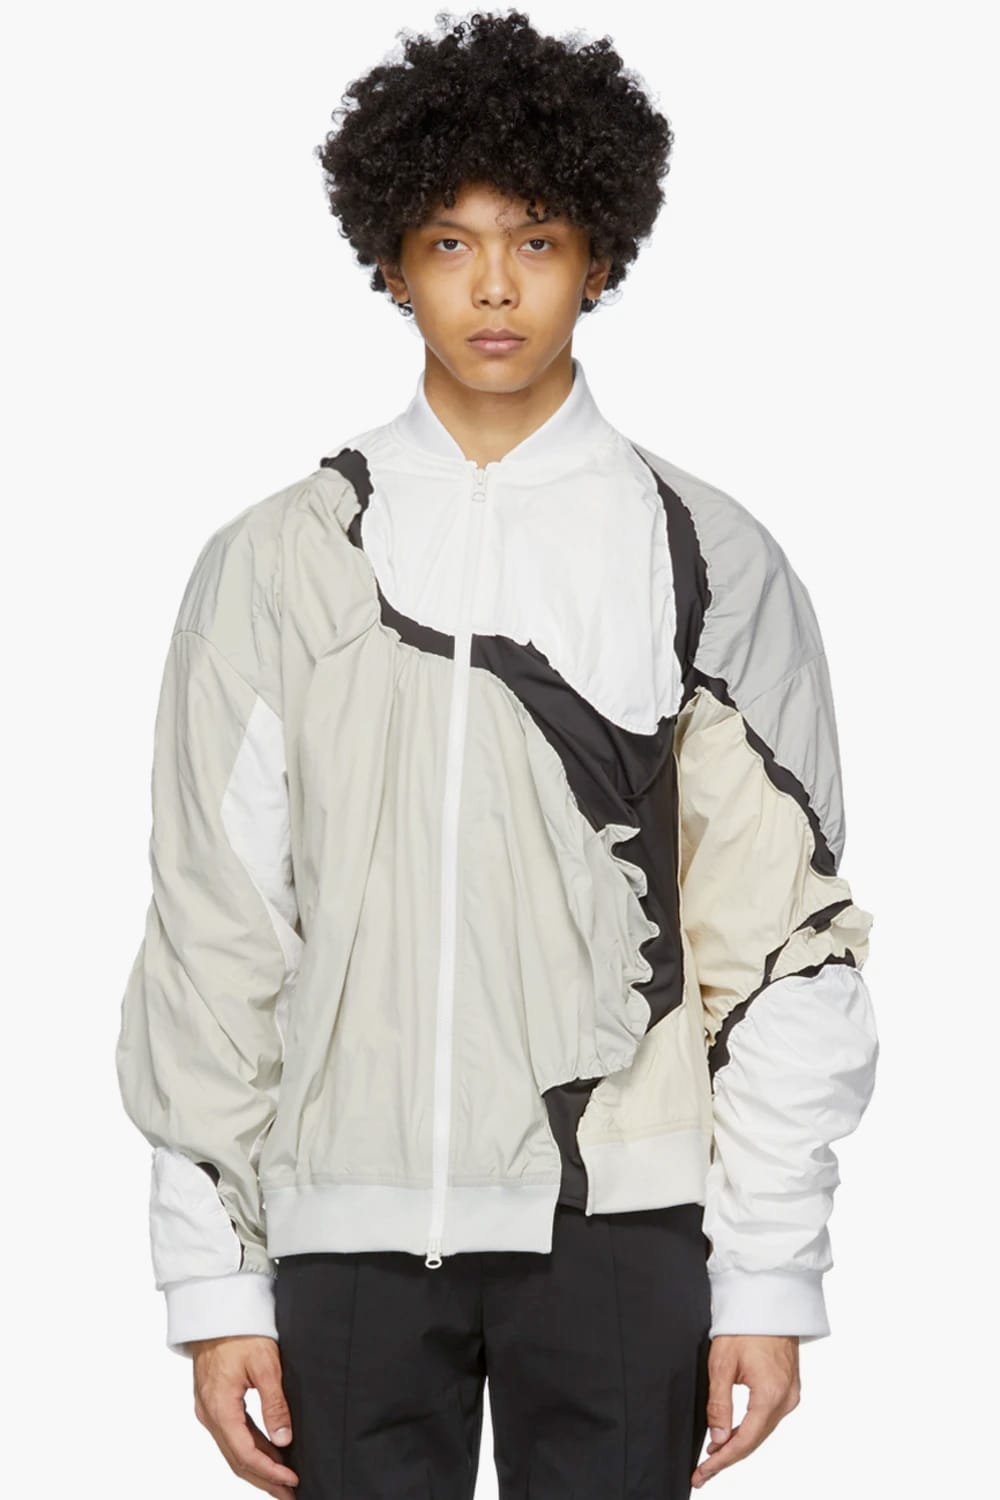 Post Archive Faction 3.0 Left Jackets Release Info | HYPEBEAST